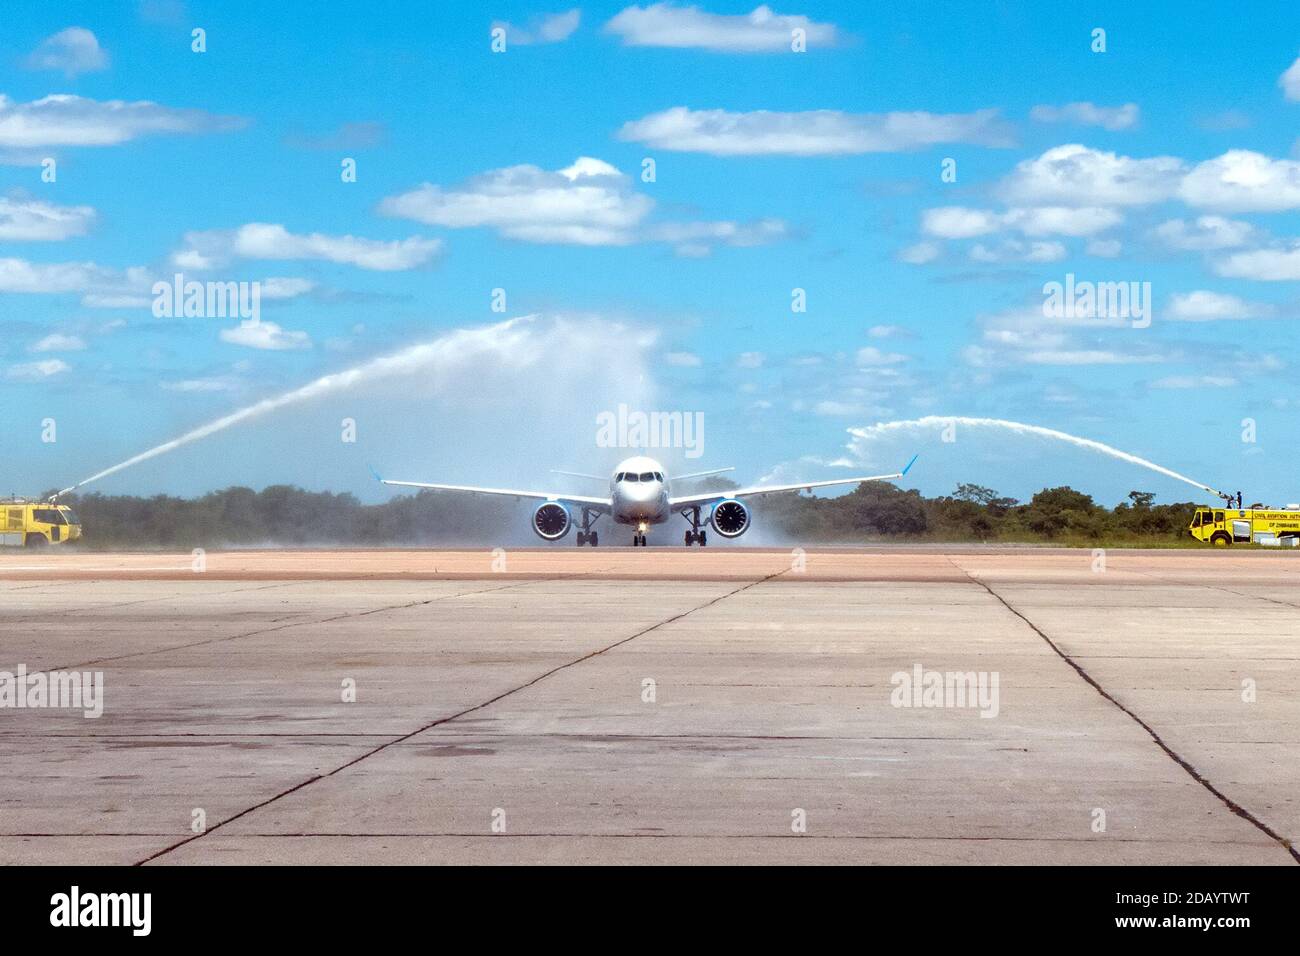 An Air Tanzania airplane arrives at Zimbabwe’s Robert Gabriel Mugabe International Airport for the first time in nearly 20 years. Stock Photo